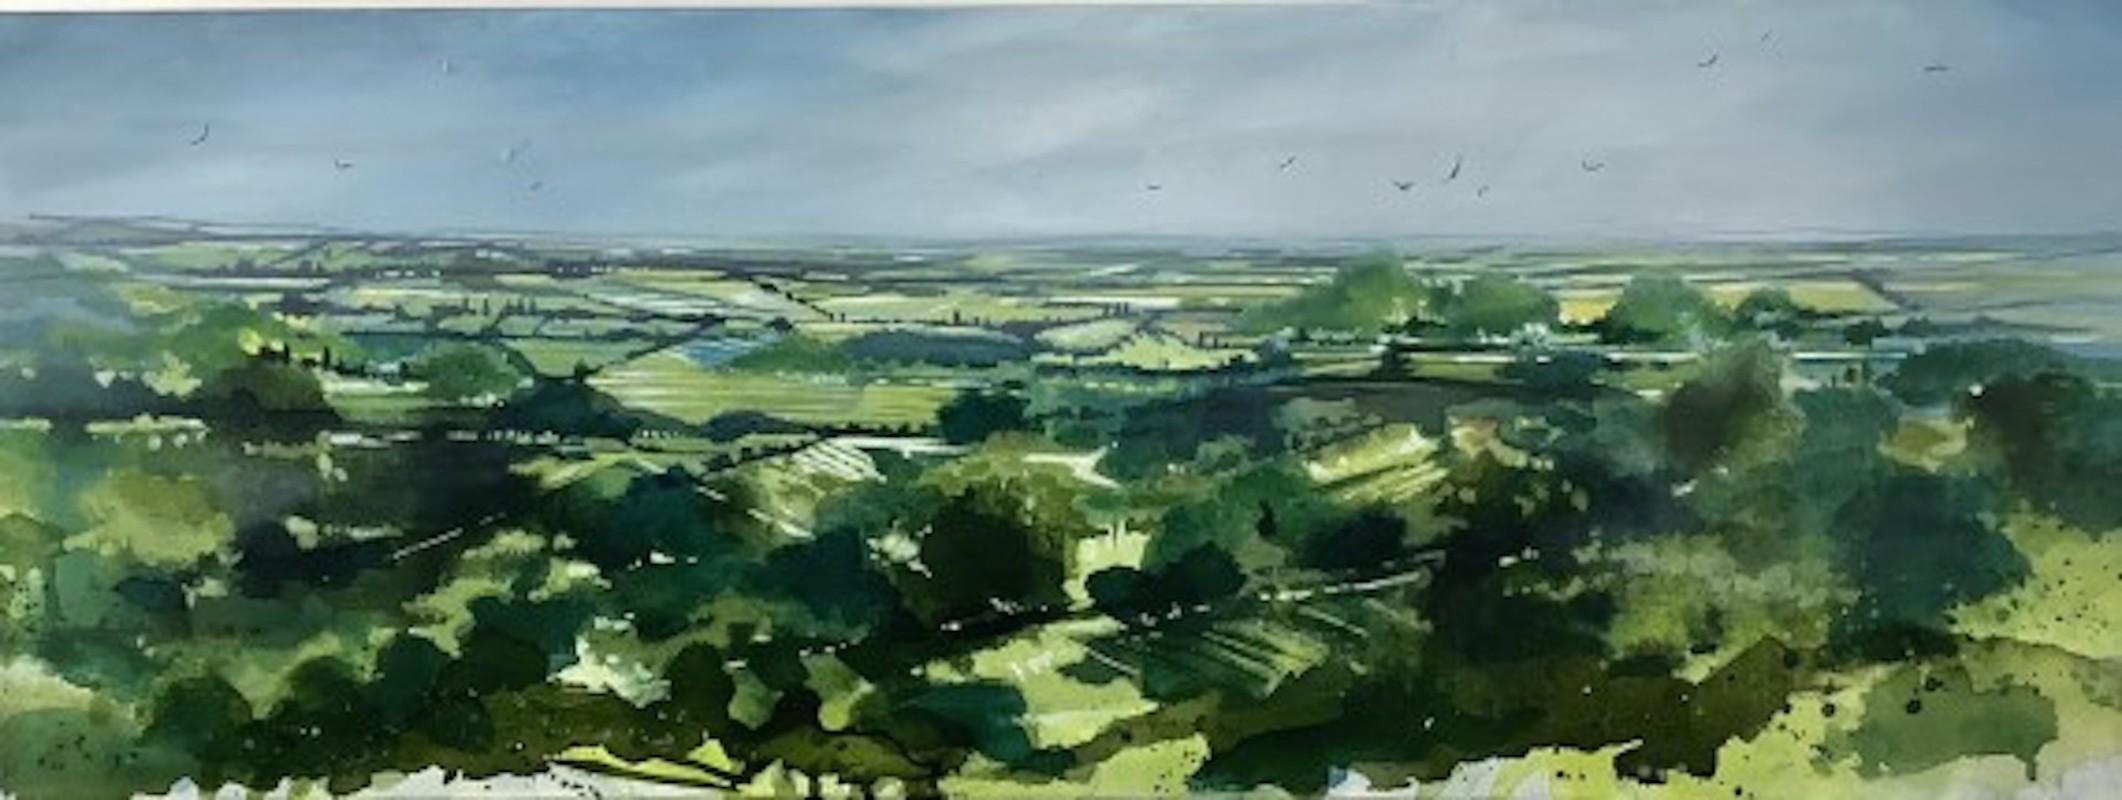 Adele Riley, Above and Beyond Cleeve Hill, Contemporary Art, Original Painting